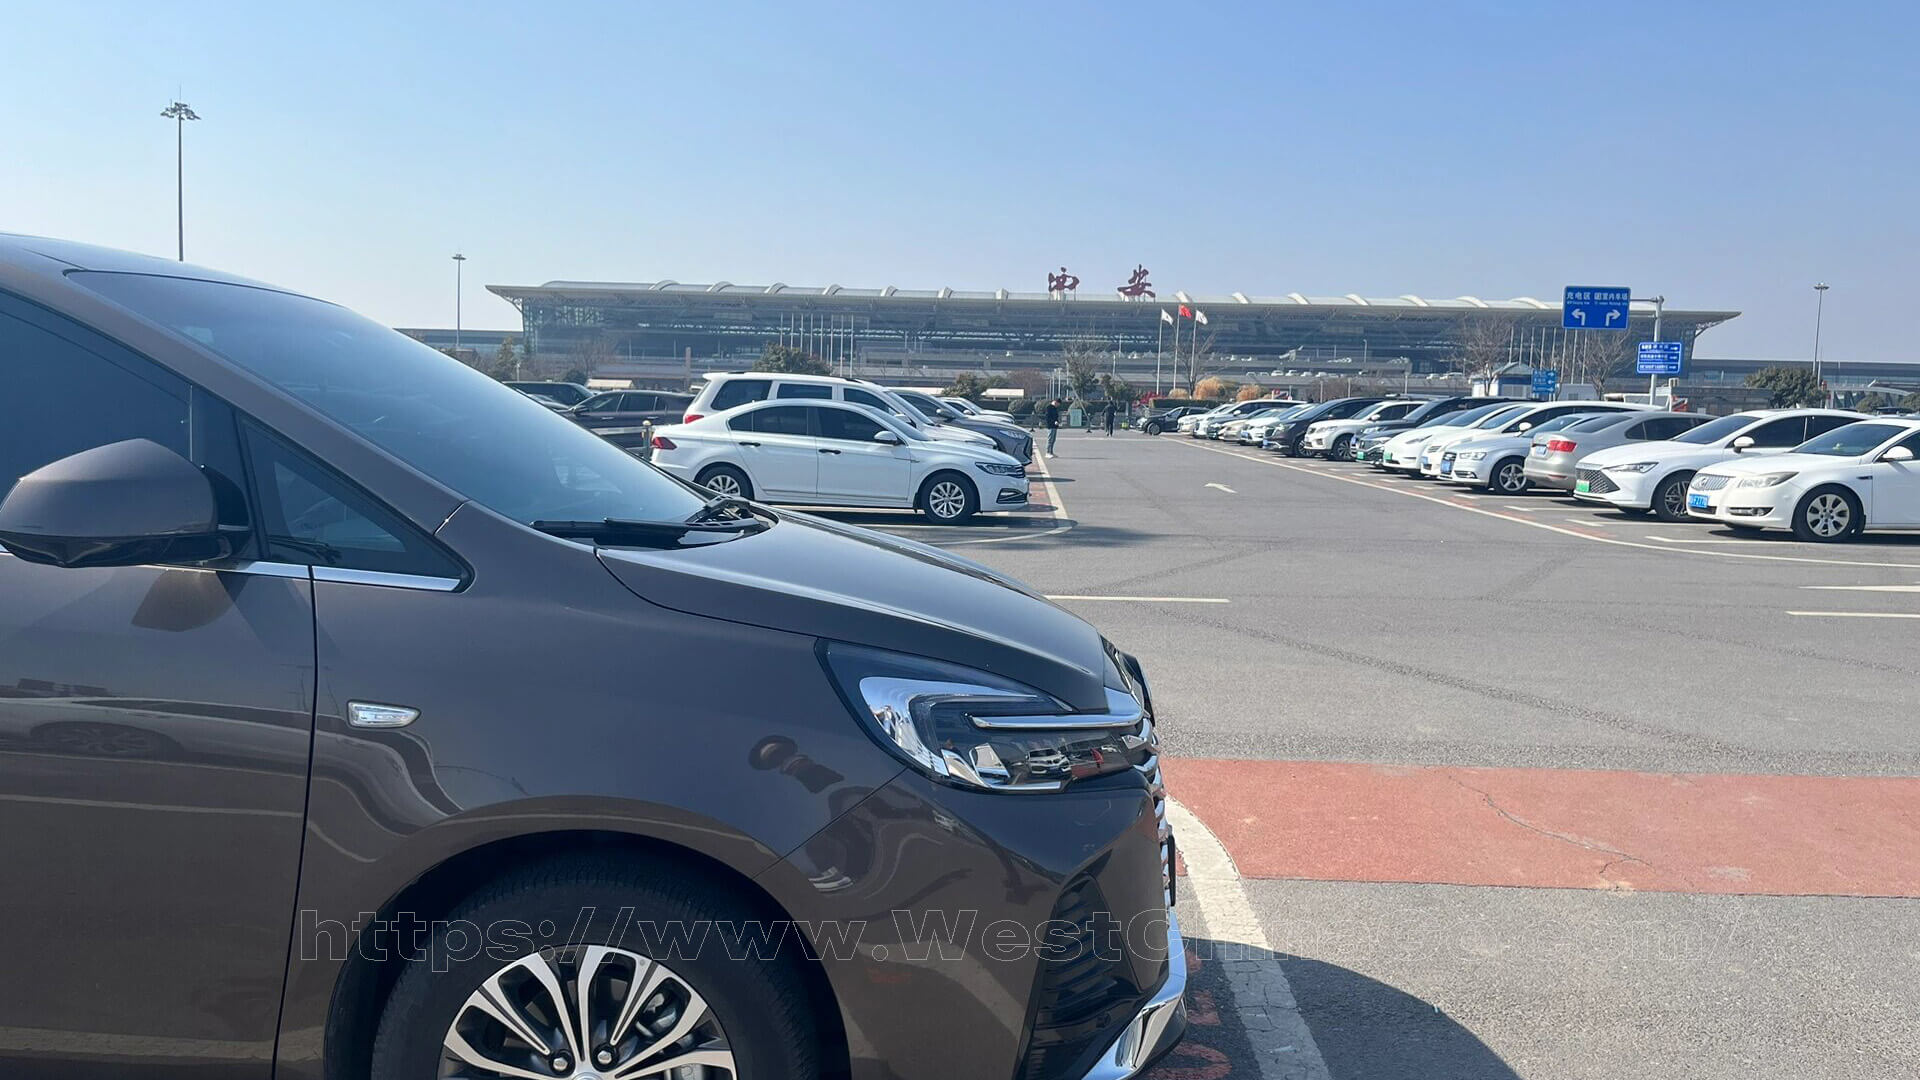 xi'an airport transfer,car rental with driver